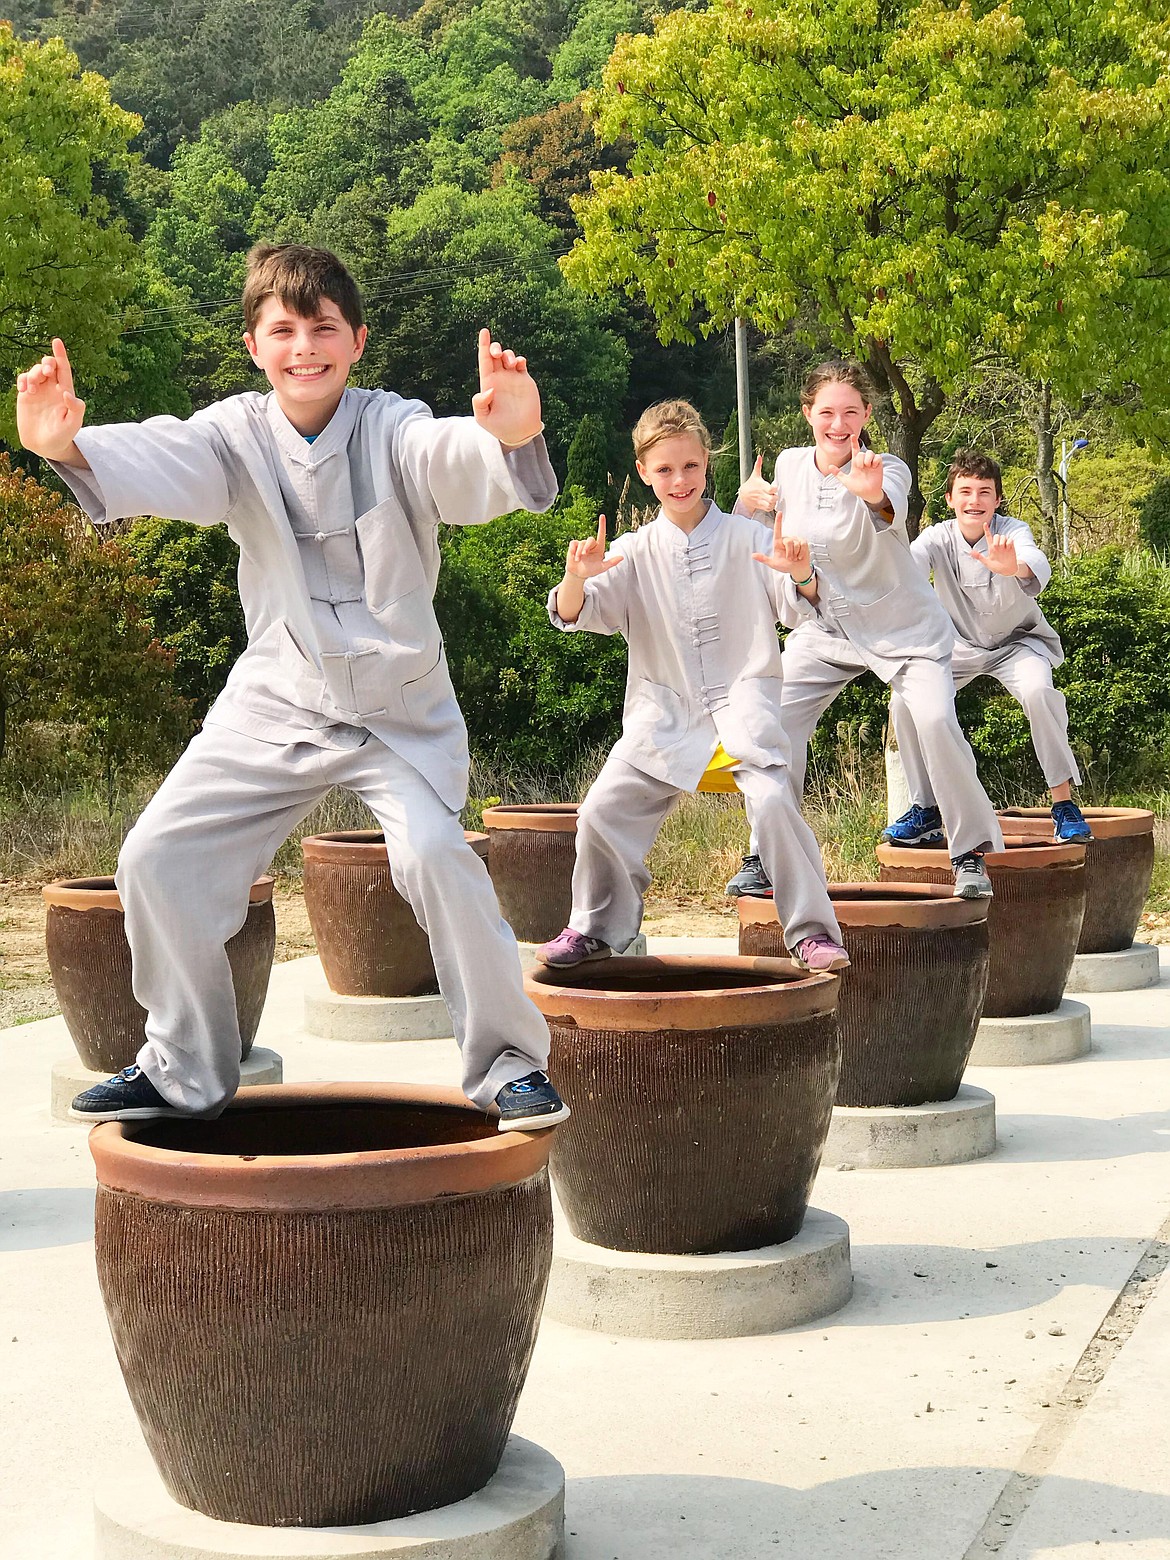 From left, Ford kids Hudson, 12, Mara, 8, Emma, 15 and and Bennett, 14, pose atop large pots at a hidden away mountaintop monastery in the Fujian Provence of Putian, China, during their six-month world trip earlier this year.
 &#147;We got to stay at a Buddhist monk monastery in exchange for picking tea leaves on their tea plantation and cleaning candle wax out of thousands of glass jars,&#148; Emma wrote to The Press. &#147;Giving back to earth and the Buddhist monk community and supporting the cycle of life helped me realize that the art of giving is so much more beneficial than receiving.&#148; (Courtesy photo)